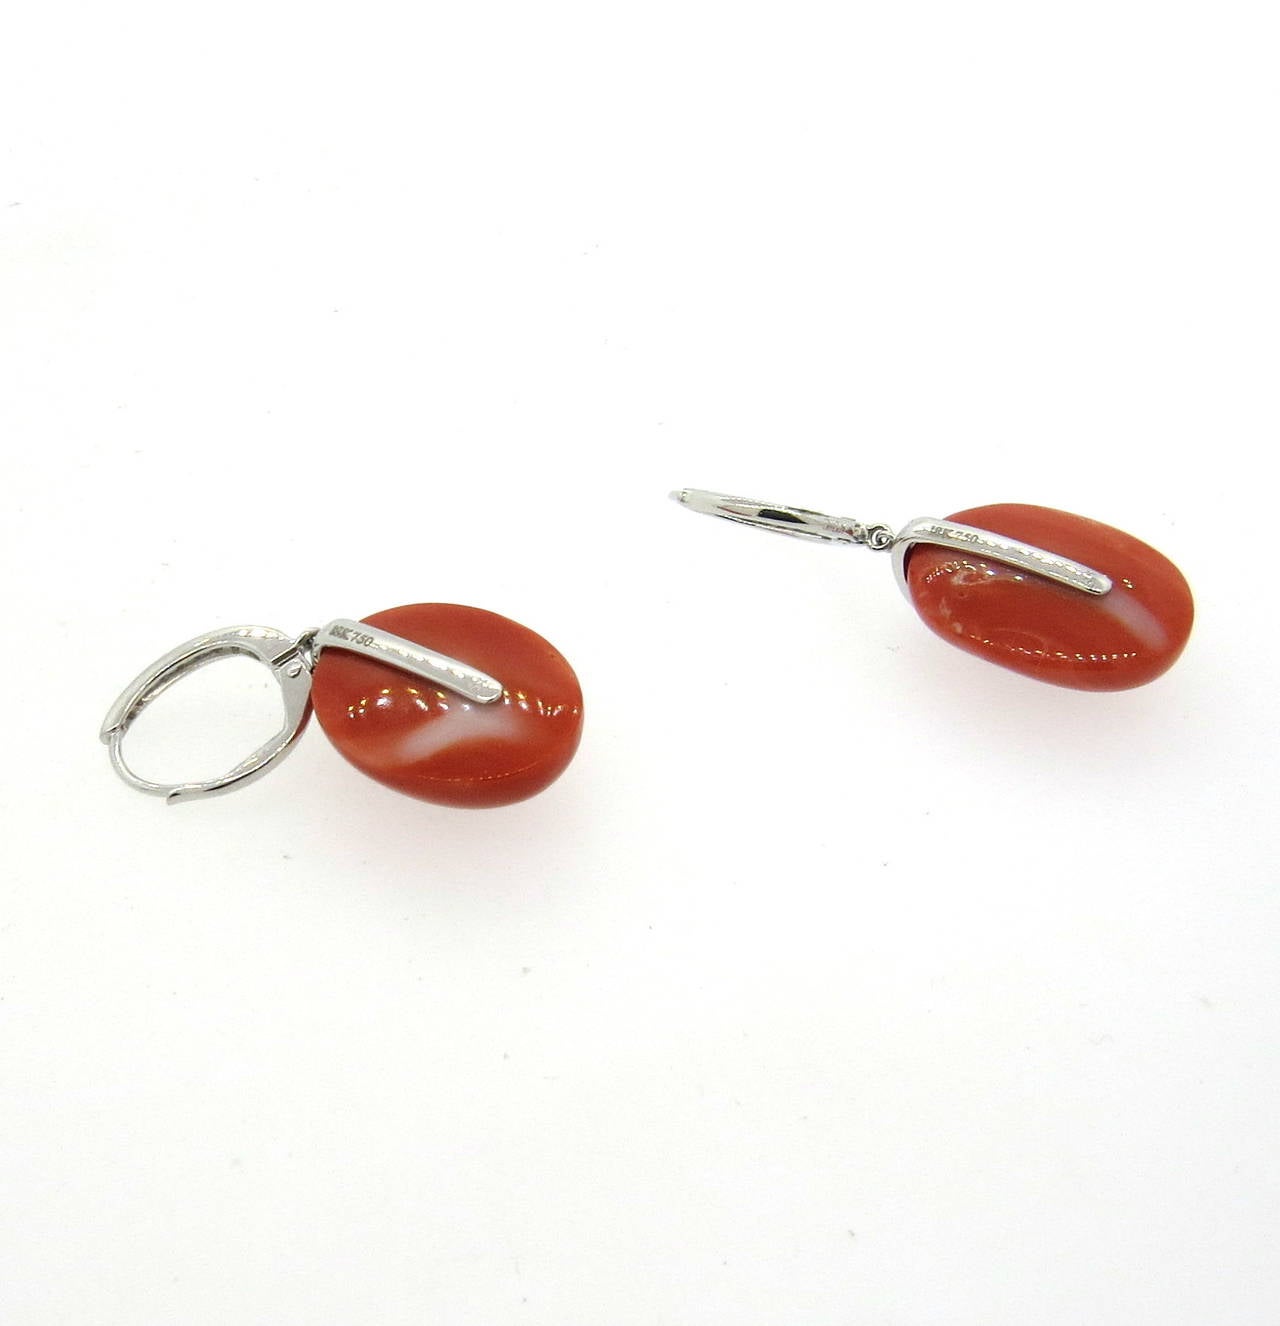 18k white gold drop earrings, set with diamonds and oval coral stones. Earrings are 37mm long, corals measure 20mm x 14mm. Weight - 8.9 grams